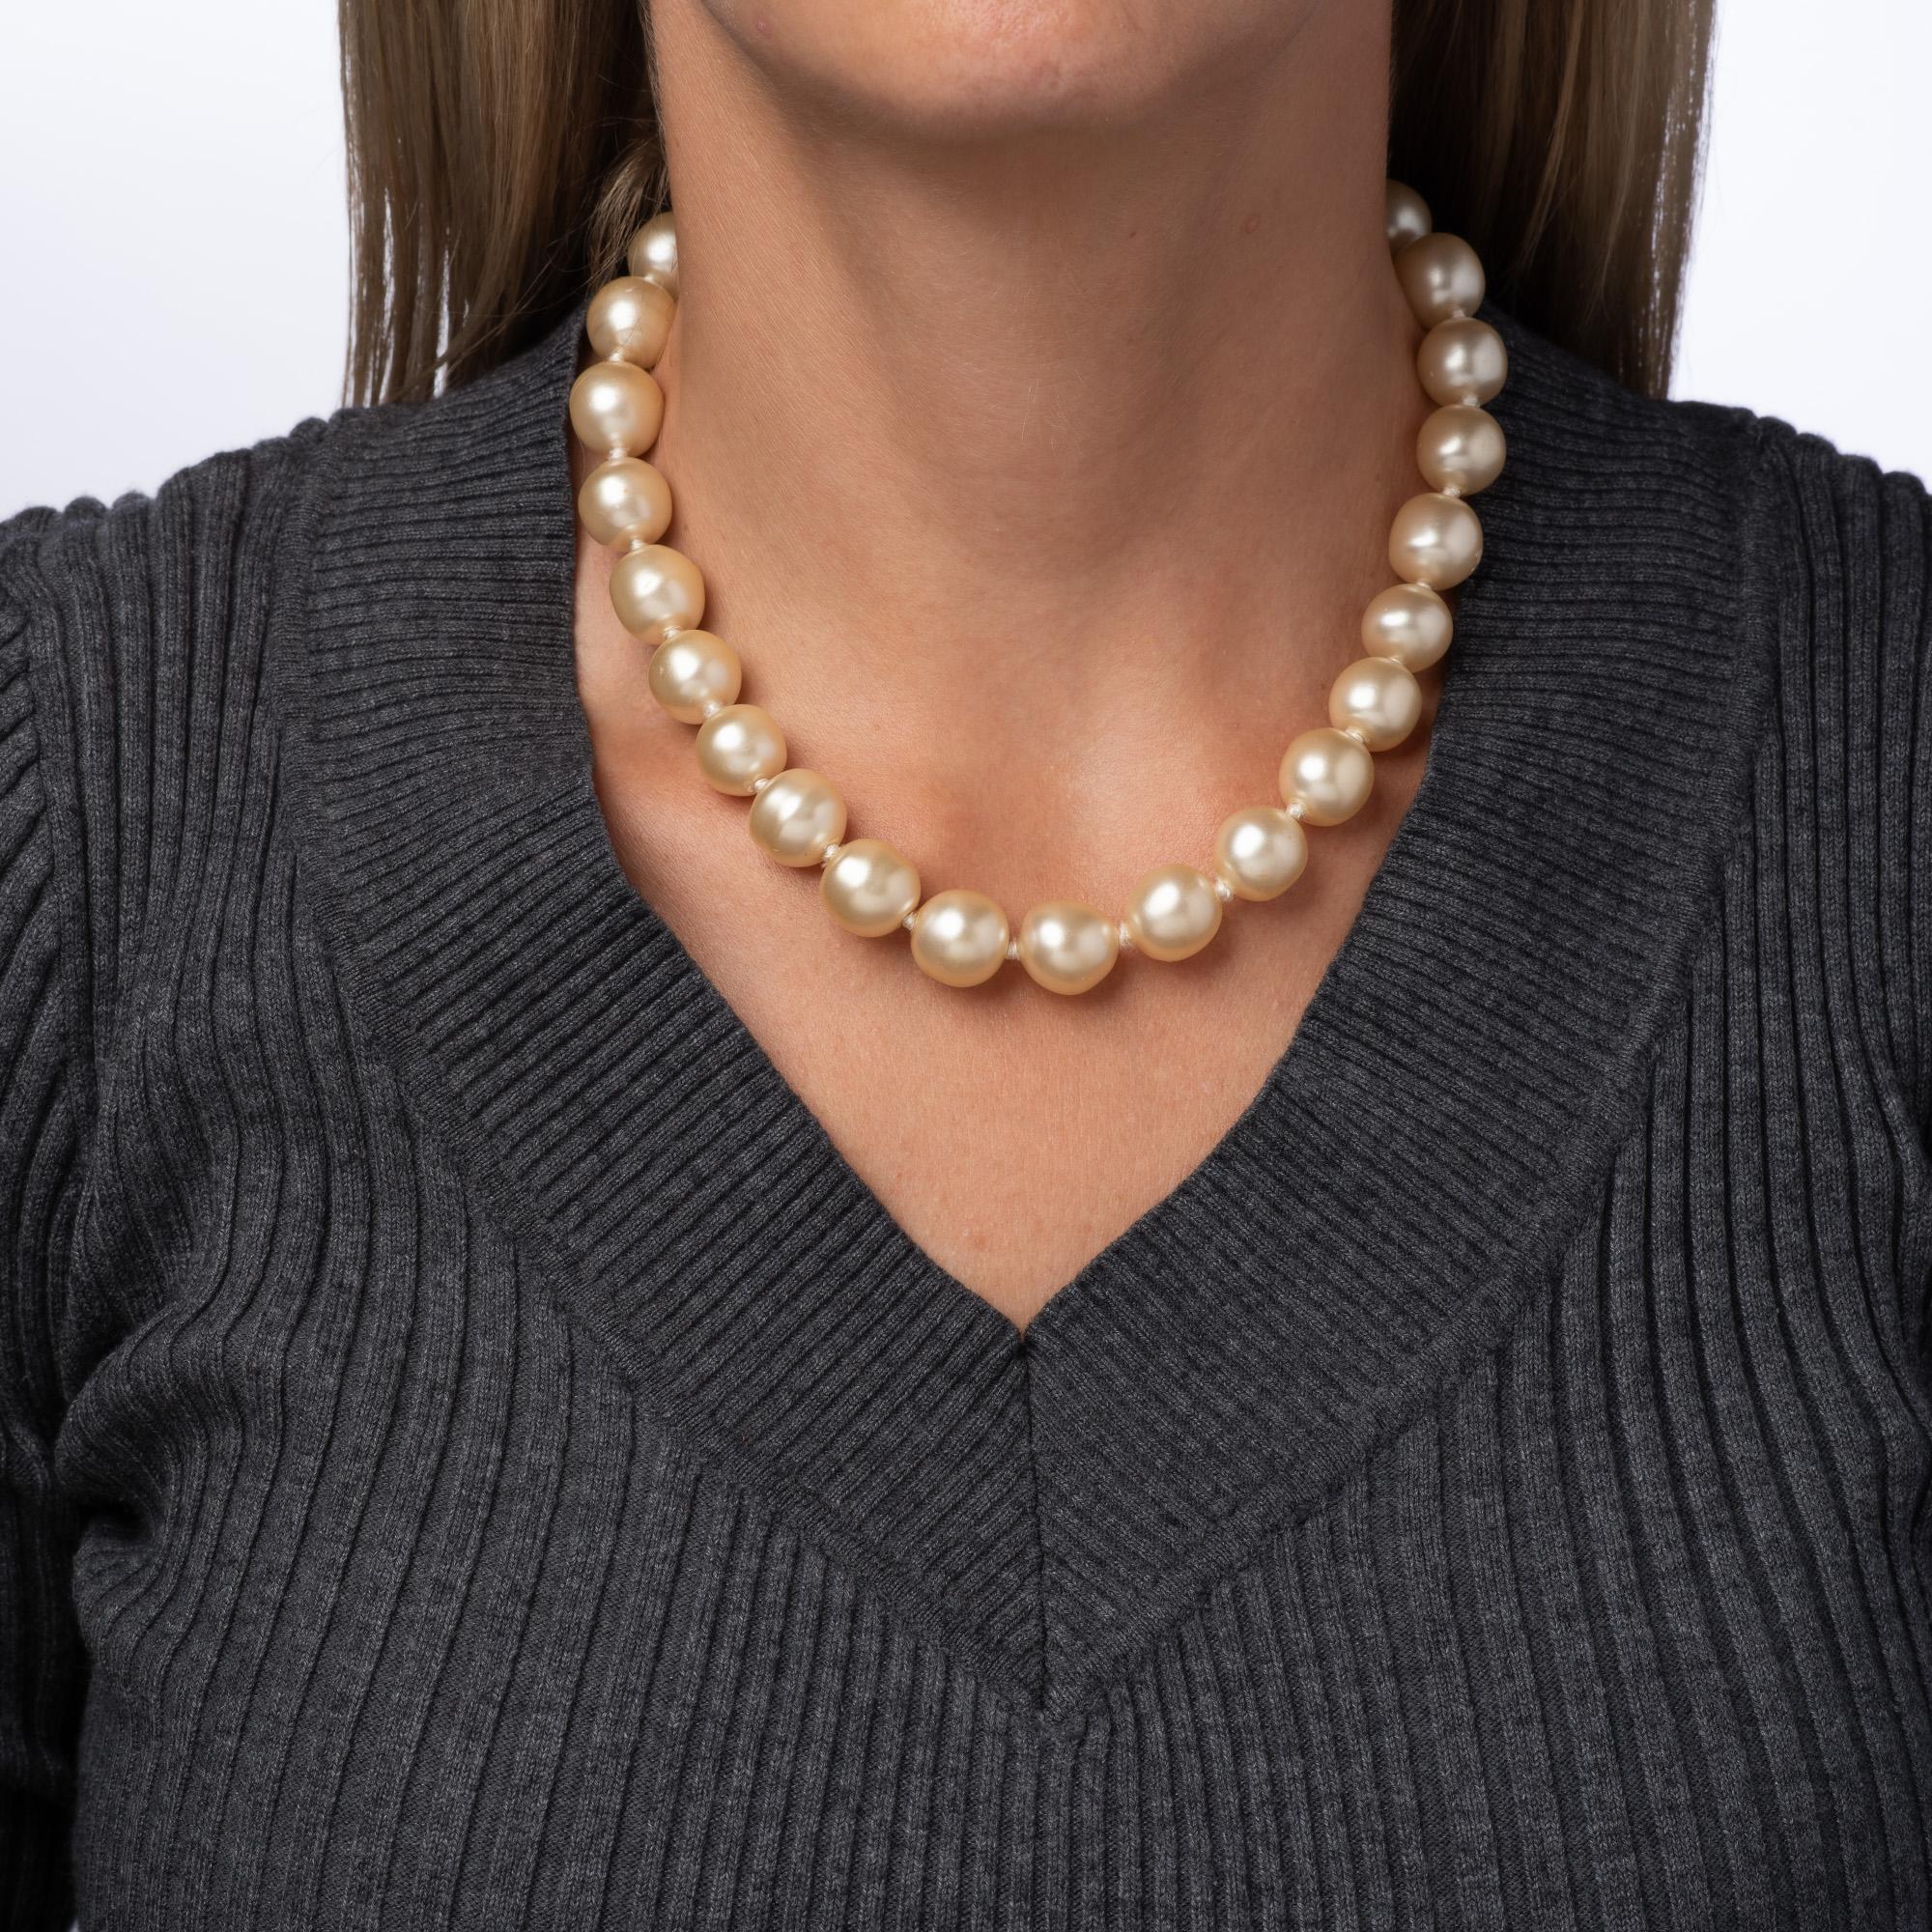 Vintage Chanel choker necklace with a yellow gold-tone textured toggle clasp (circa 1995). 

The necklace features 14.5mm faux pearls of irregular shape. Measuring 16 inches in length the necklace sits nicely at the nape of the neck. The faux pearls